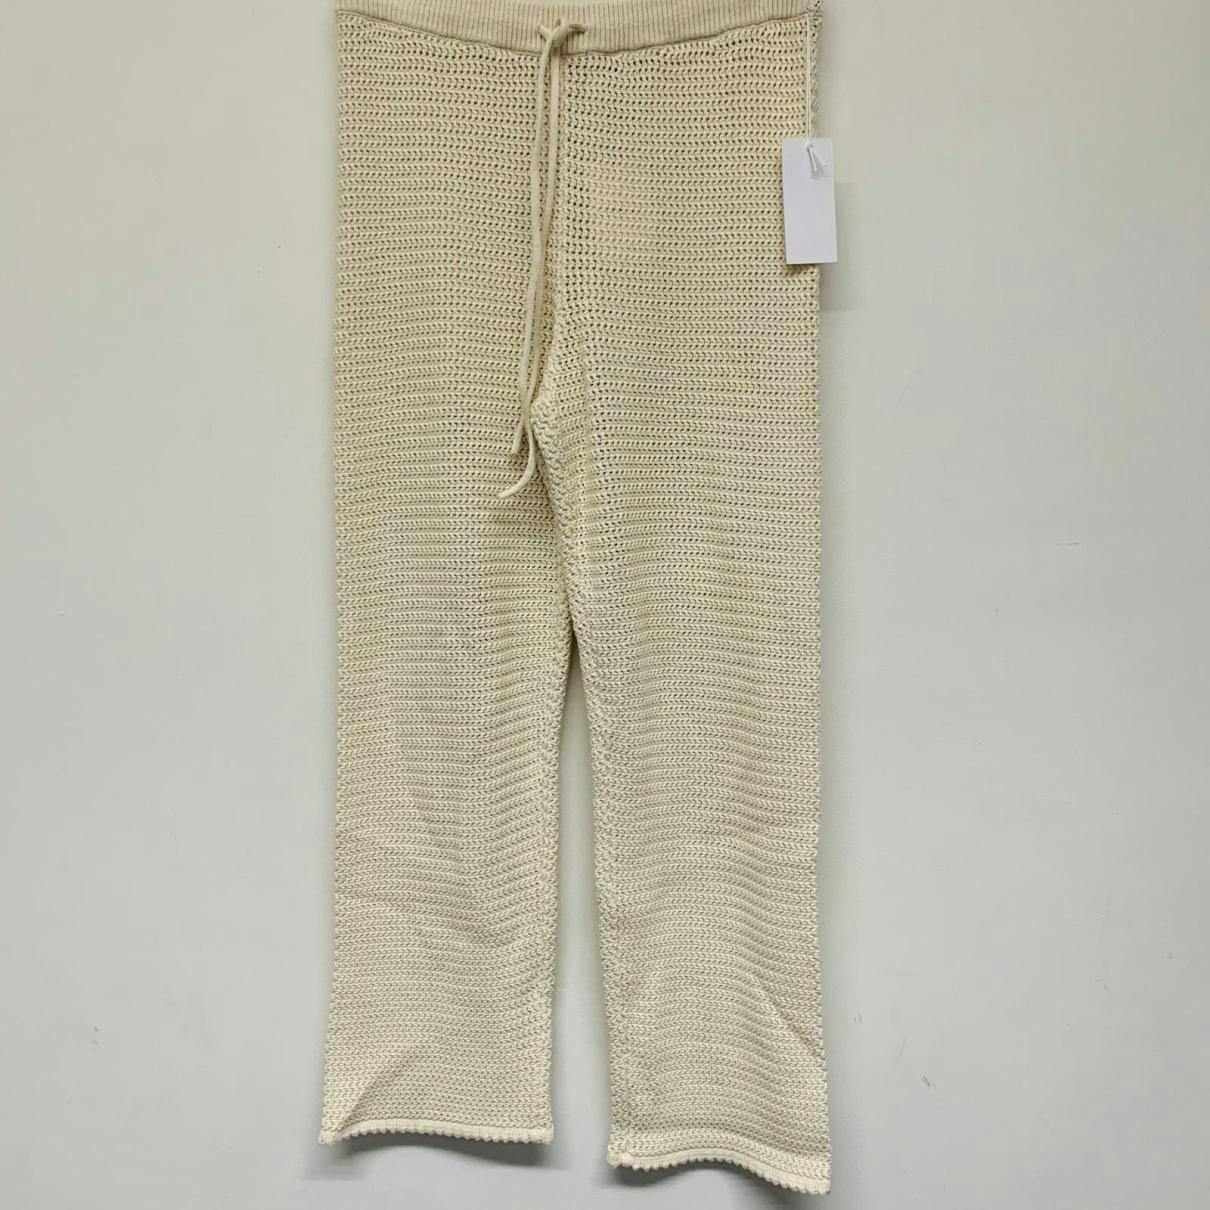 https://images.vestiairecollective.com/cdn-cgi/image/q=75,f=auto,/produit/white-synthetic-reformation-trousers-35136158-2_2.jpg?secret=VC-e9eee96a-a819-4431-ad12-d066be2626ef